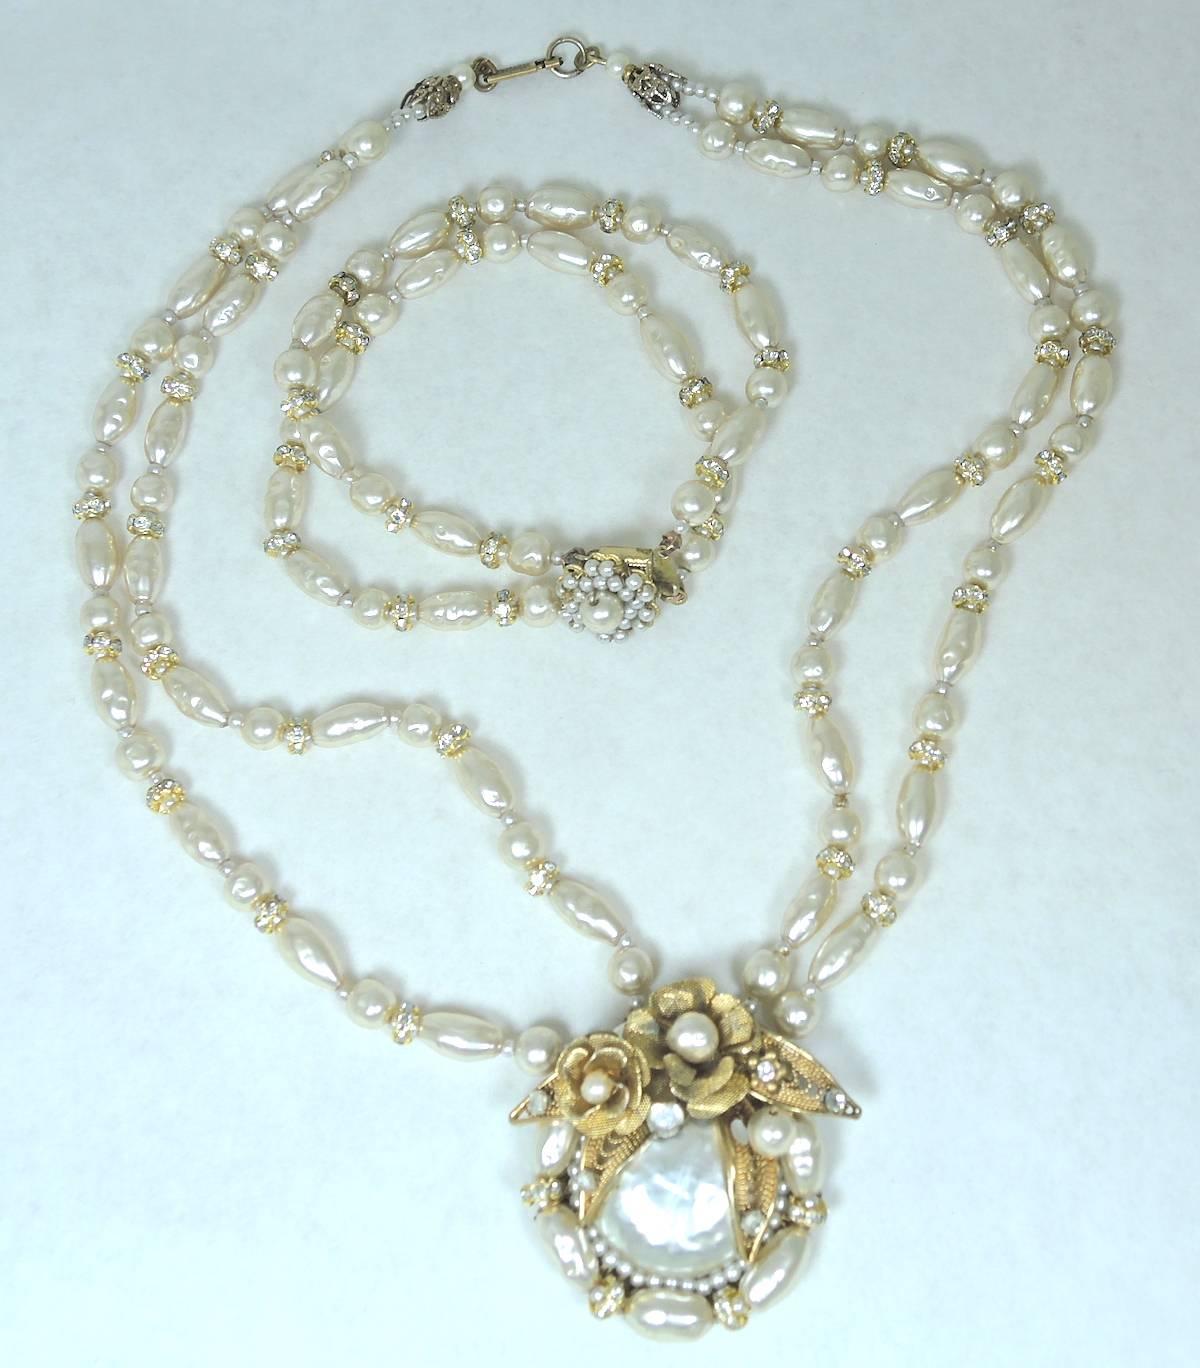 This stunning 1948 Miriam Haskell set features a double strand faux baroque pearls with rhondelle spacers.  It leads downward to a gorgeous centerpiece that has a large faux pearl center with rice pearls on the border and two golden flowers on top.